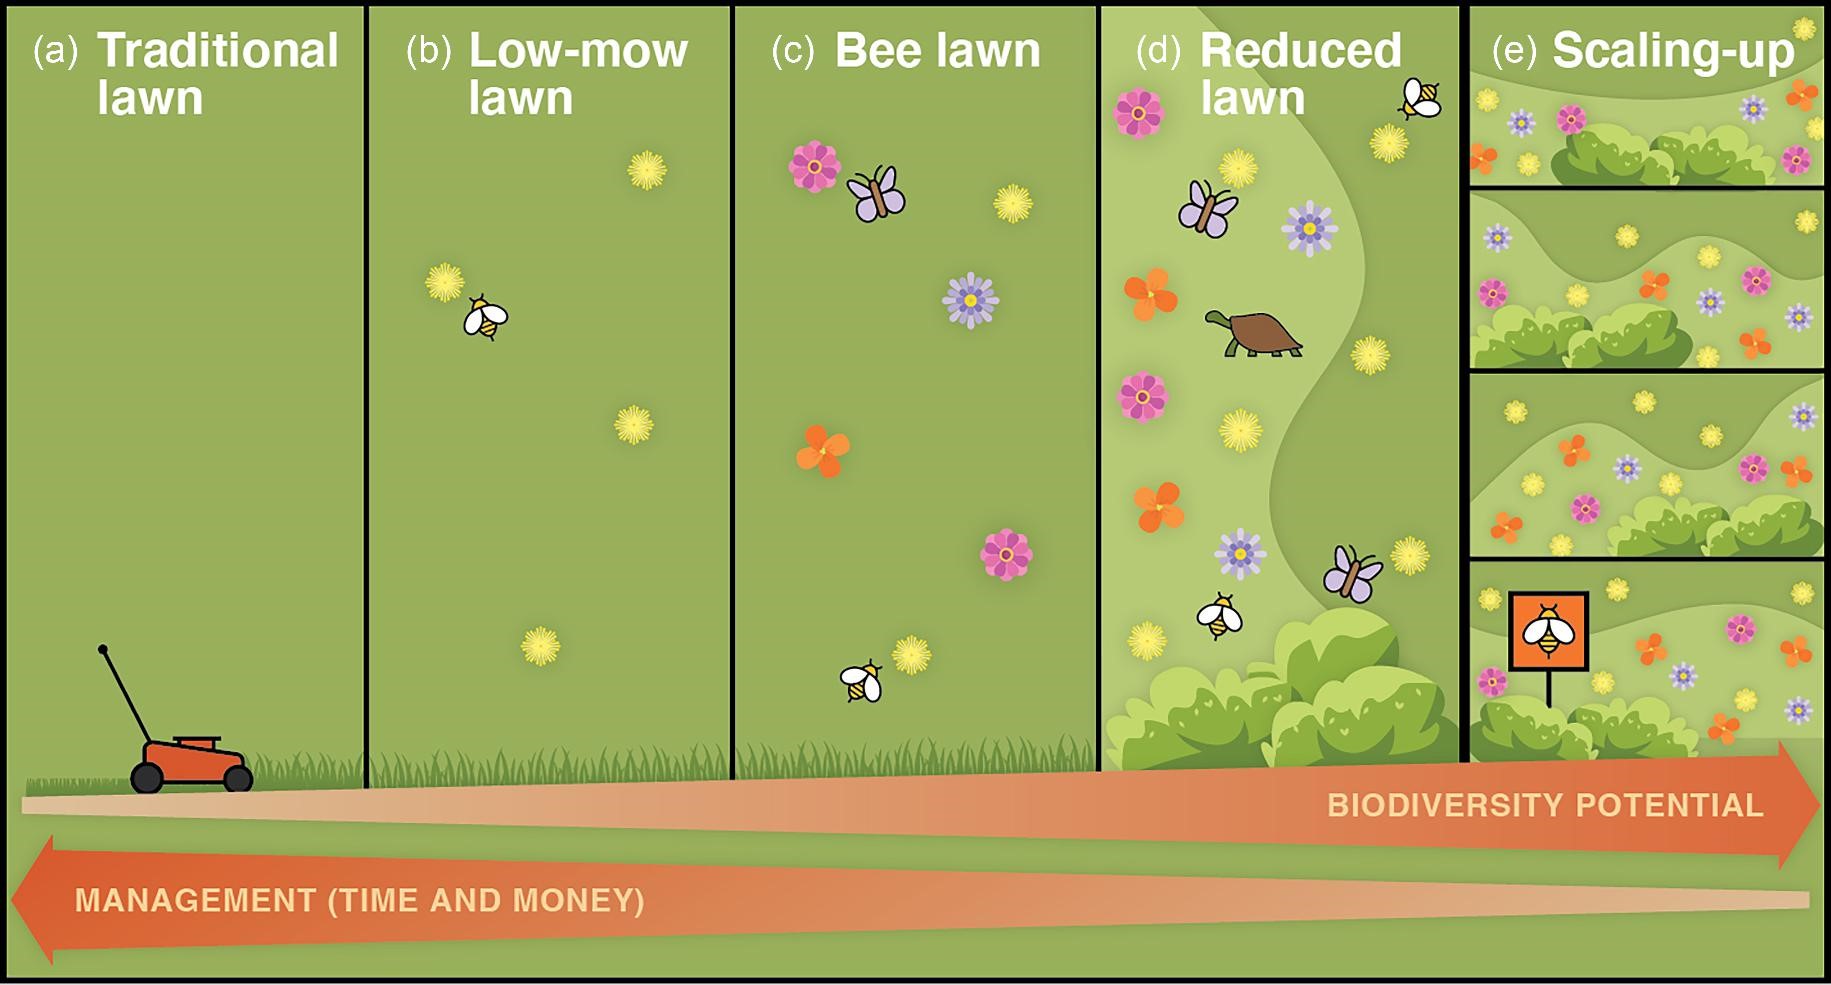 Susannah Lerman study on biodiversity potential in traditional lawns